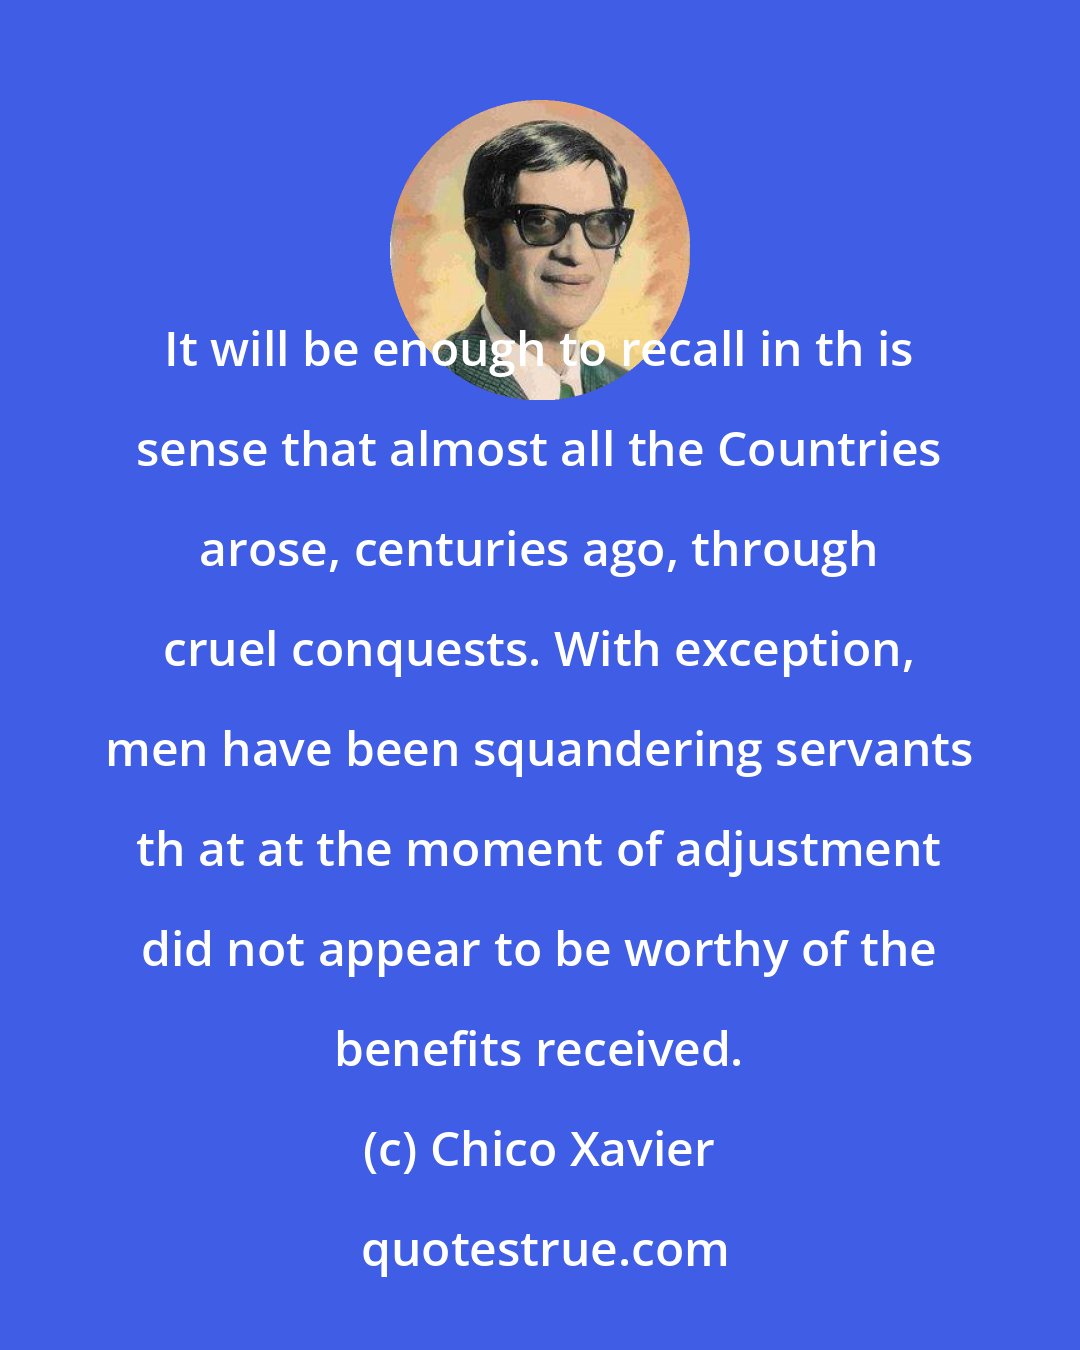 Chico Xavier: It will be enough to recall in th is sense that almost all the Countries arose, centuries ago, through cruel conquests. With exception, men have been squandering servants th at at the moment of adjustment did not appear to be worthy of the benefits received.